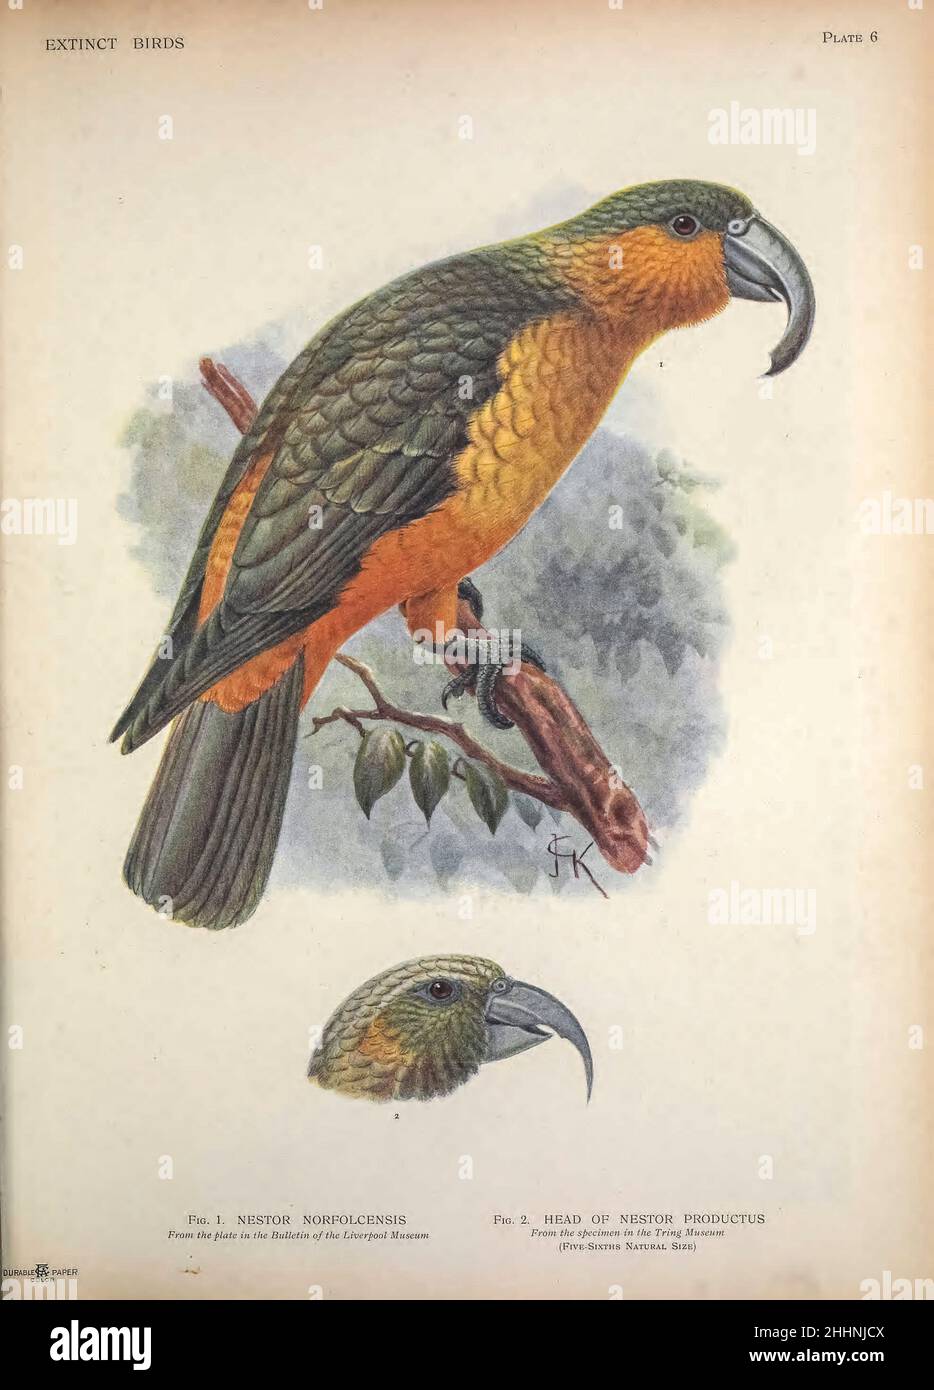 The Norfolk kākā (Nestor productus) is an extinct species of large parrot, belonging to the parrot family Nestoridae and head of Nestor productus from ' Extinct birds ' : an attempt to unite in one volume a short account of those birds which have become extinct in historical times : that is, within the last six or seven hundred years : to which are added a few which still exist, but are on the verge of extinction. by Baron, Lionel Walter Rothschild, 1868-1937 Published 1907 as a limited edition book in London by Hutchinson & Co. Stock Photo